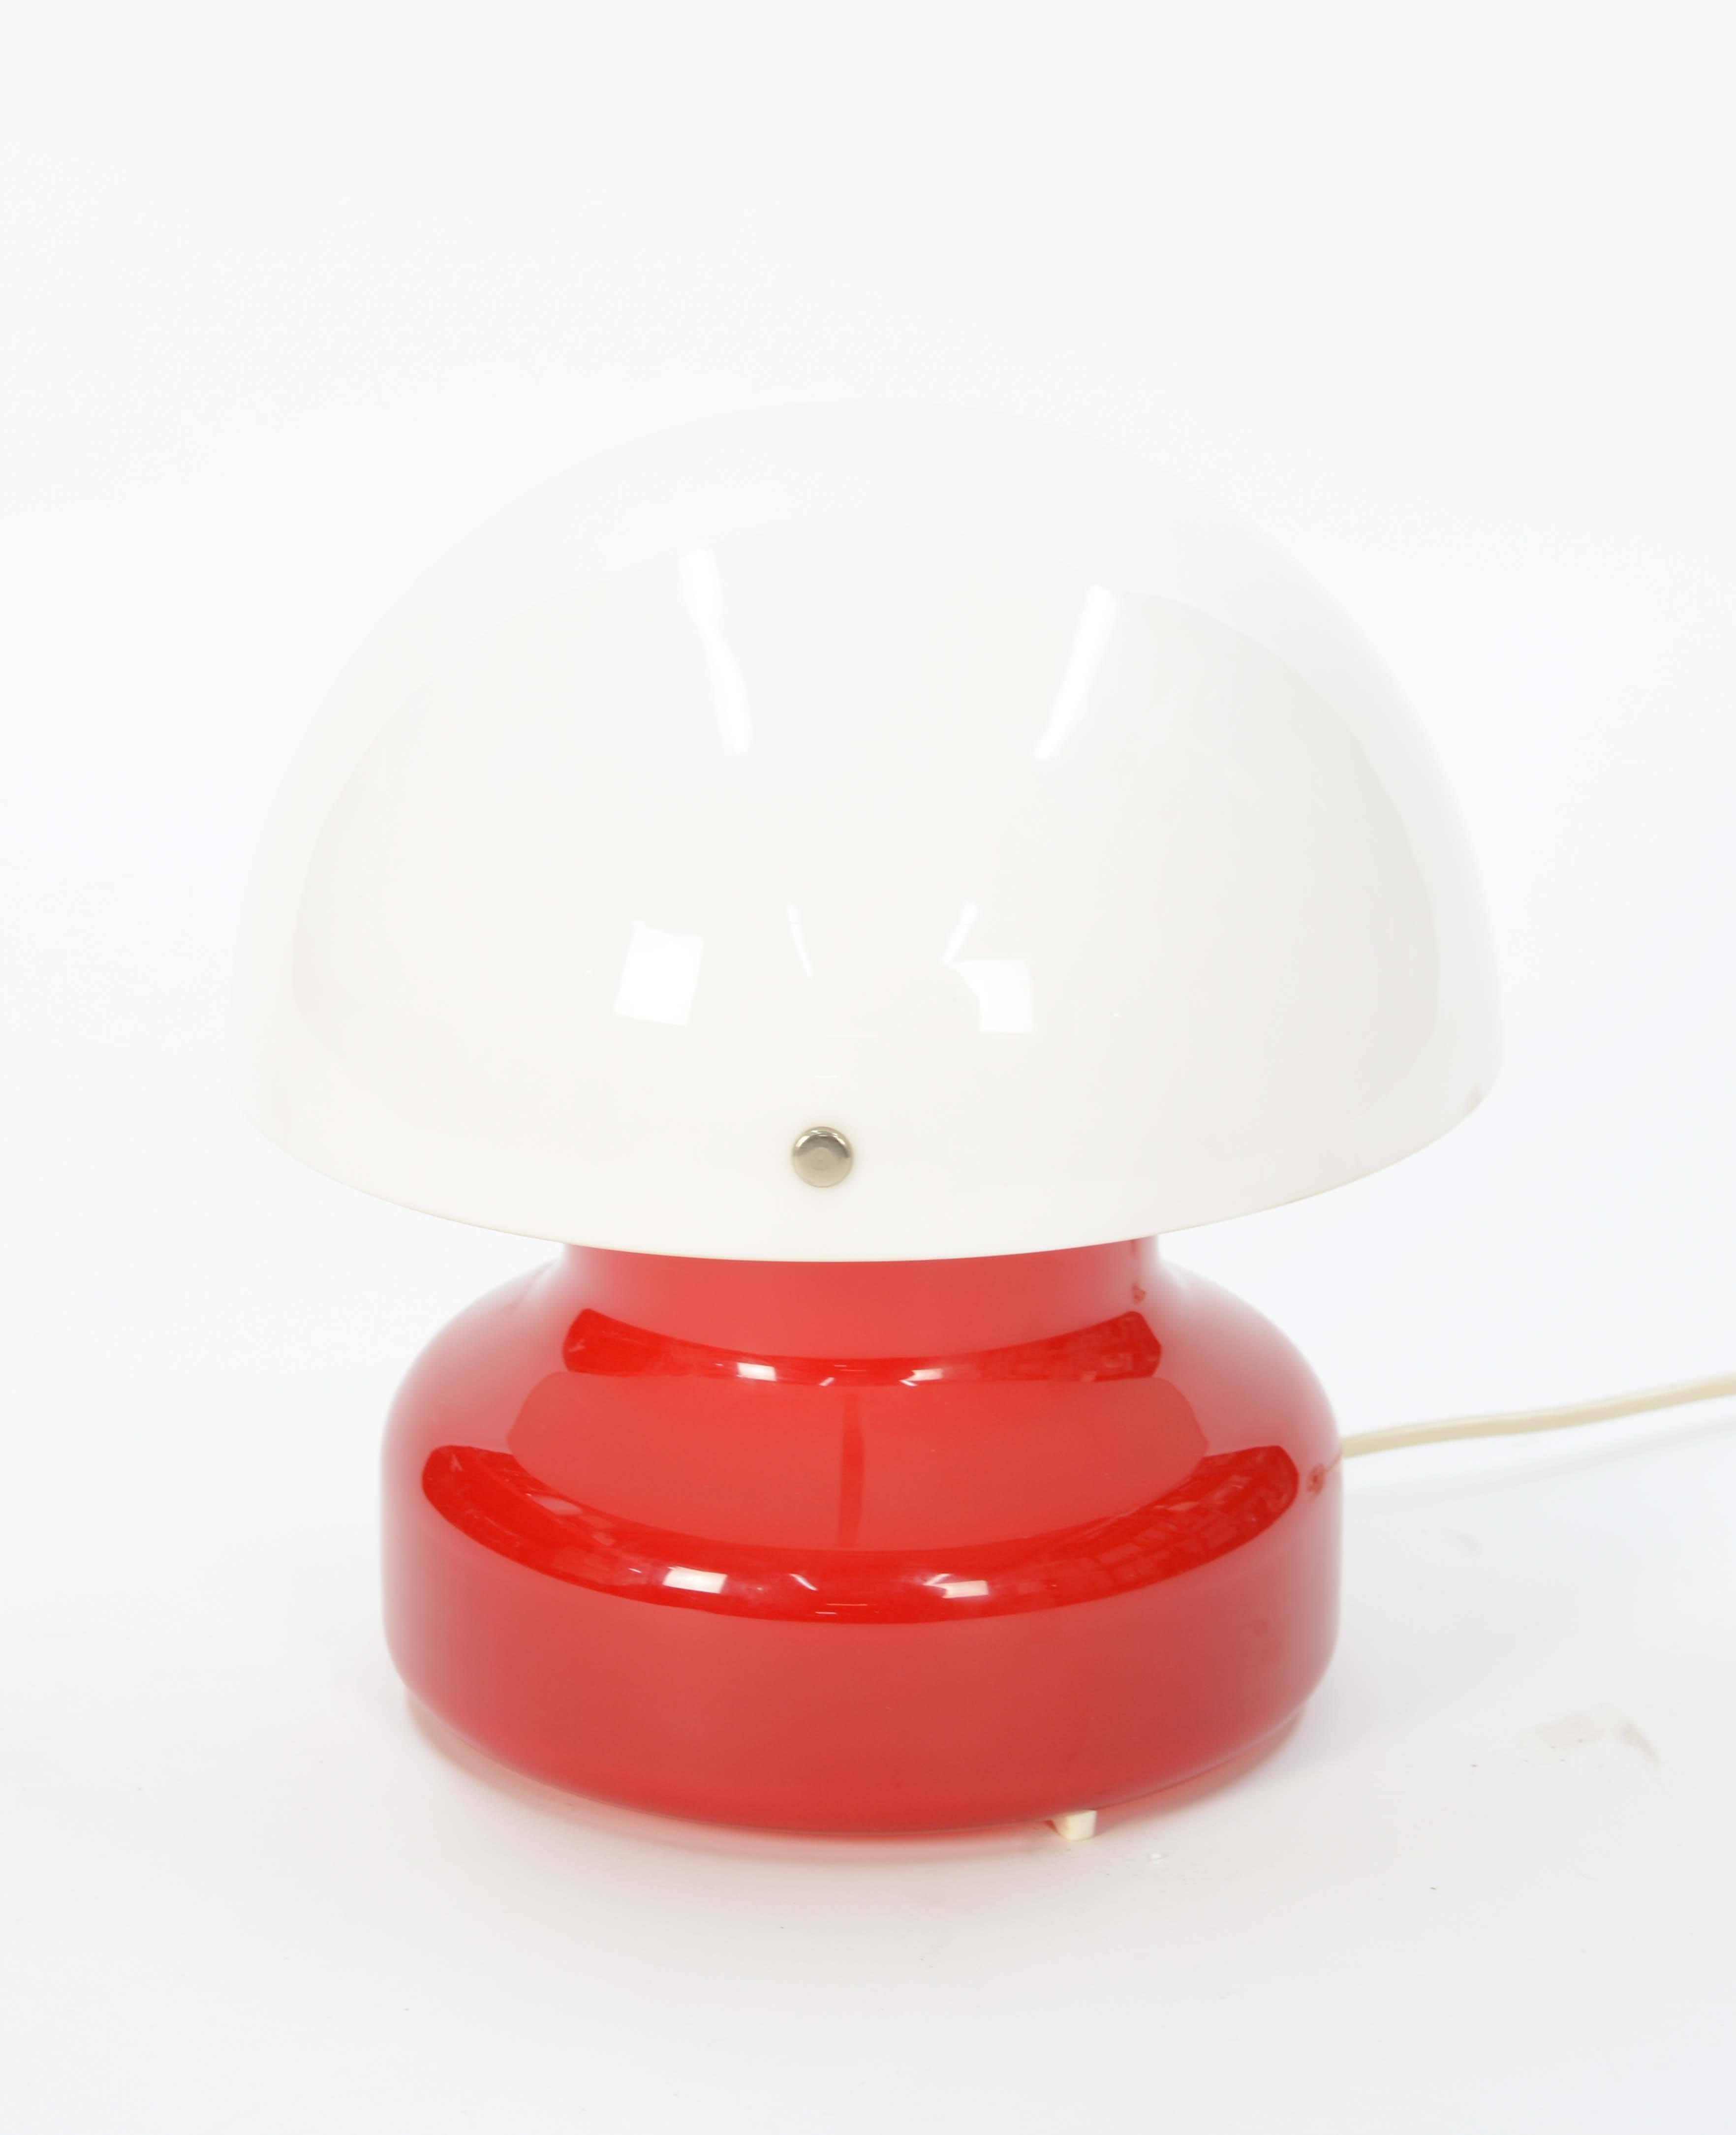 Anders Pehrson for Ateljé Lyktan mushroom desk lamp in a wonderful Swedish red and white combo. The lamp features a three way lighting pattern.